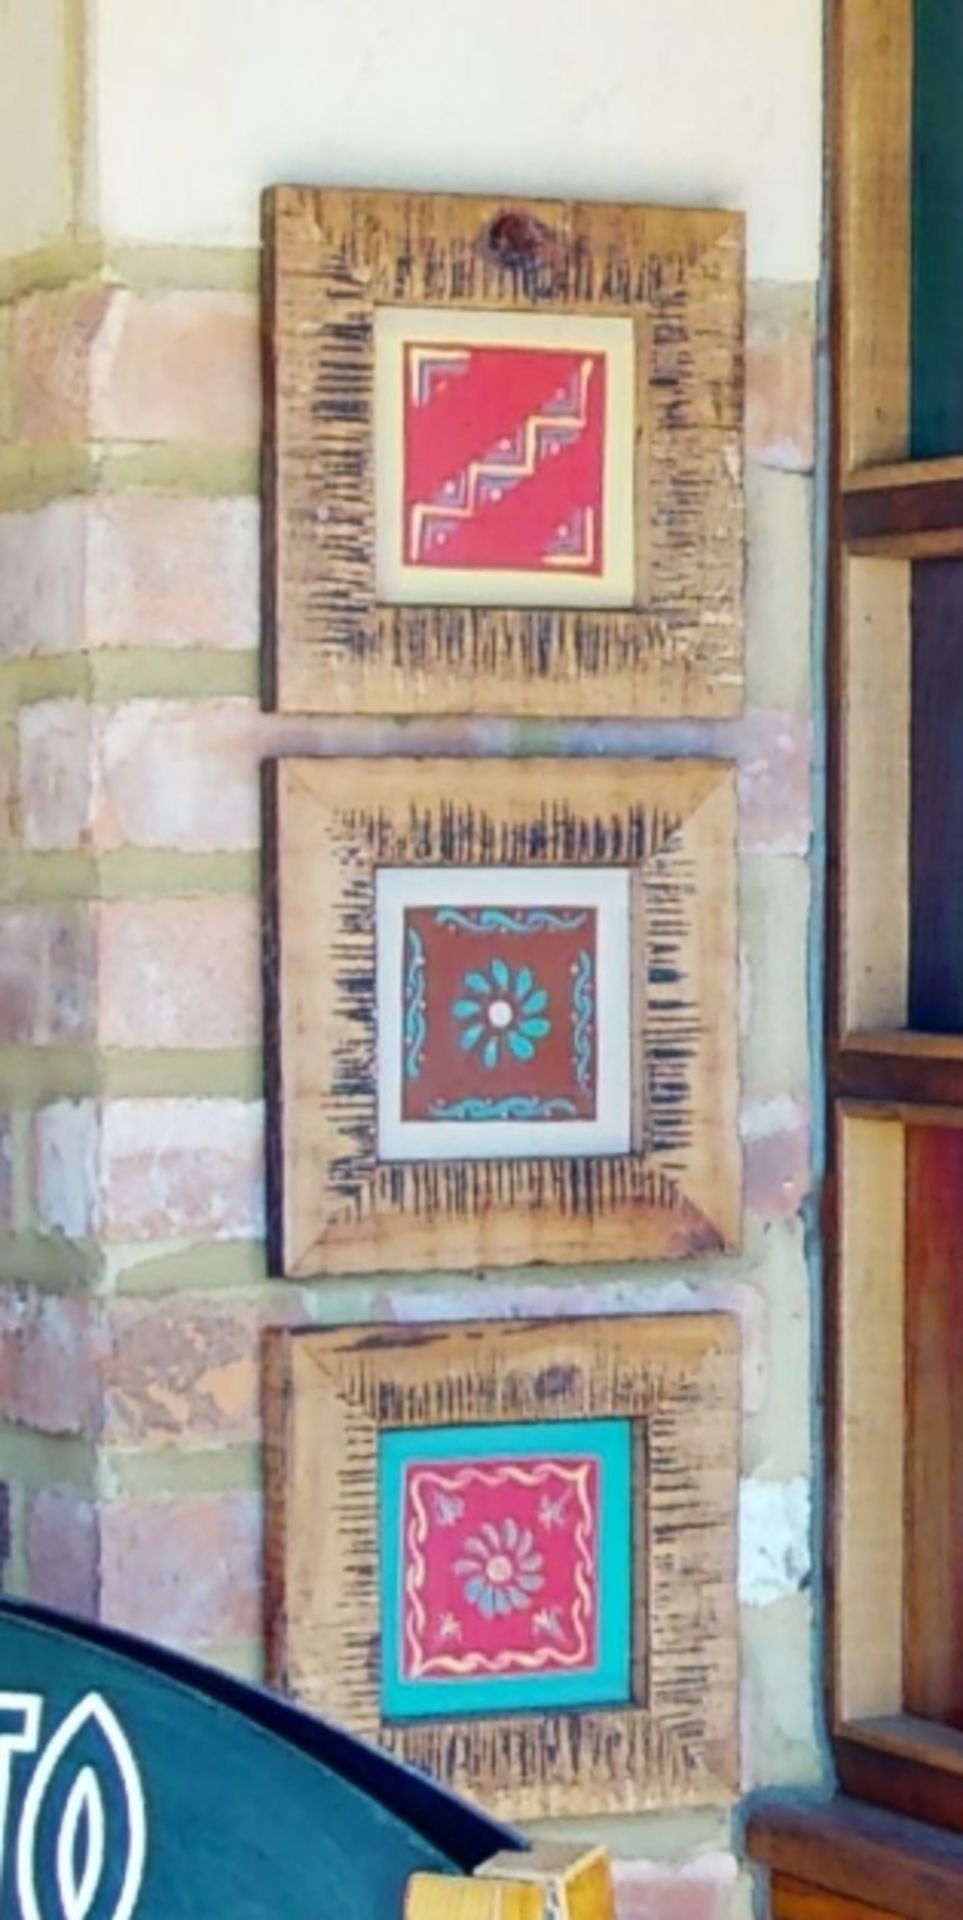 Approx 30 x Pieces of Wall Art From a Mexican Themed Restaurant - Image 25 of 26